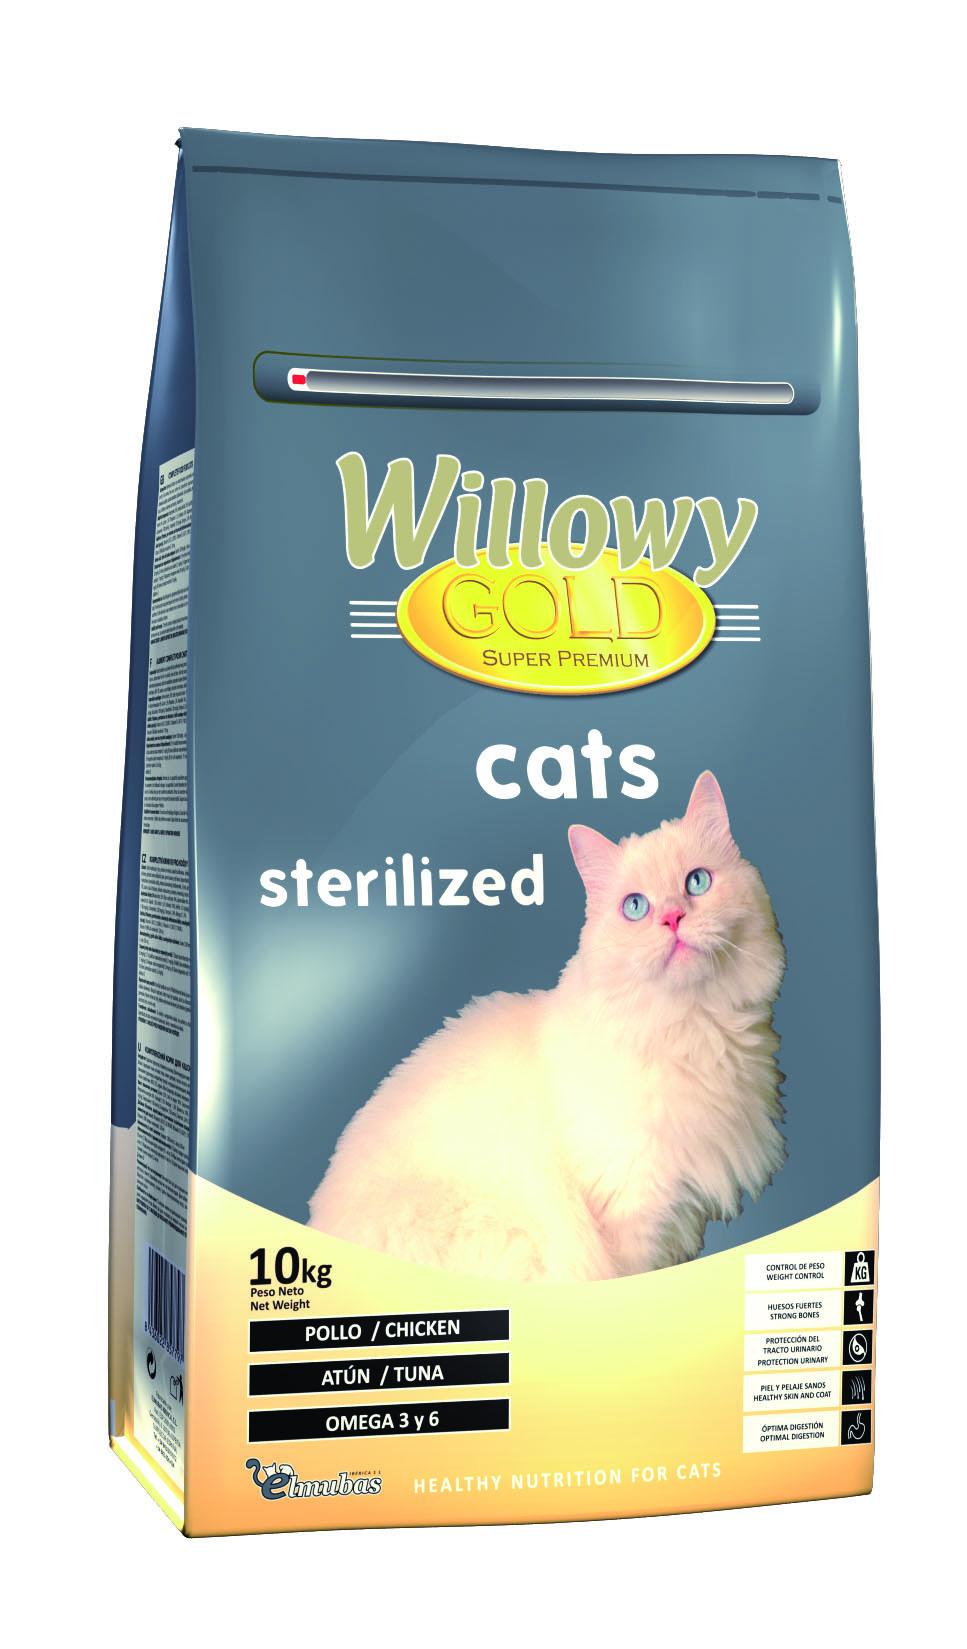 Willowy Gold CATS STERILIZED